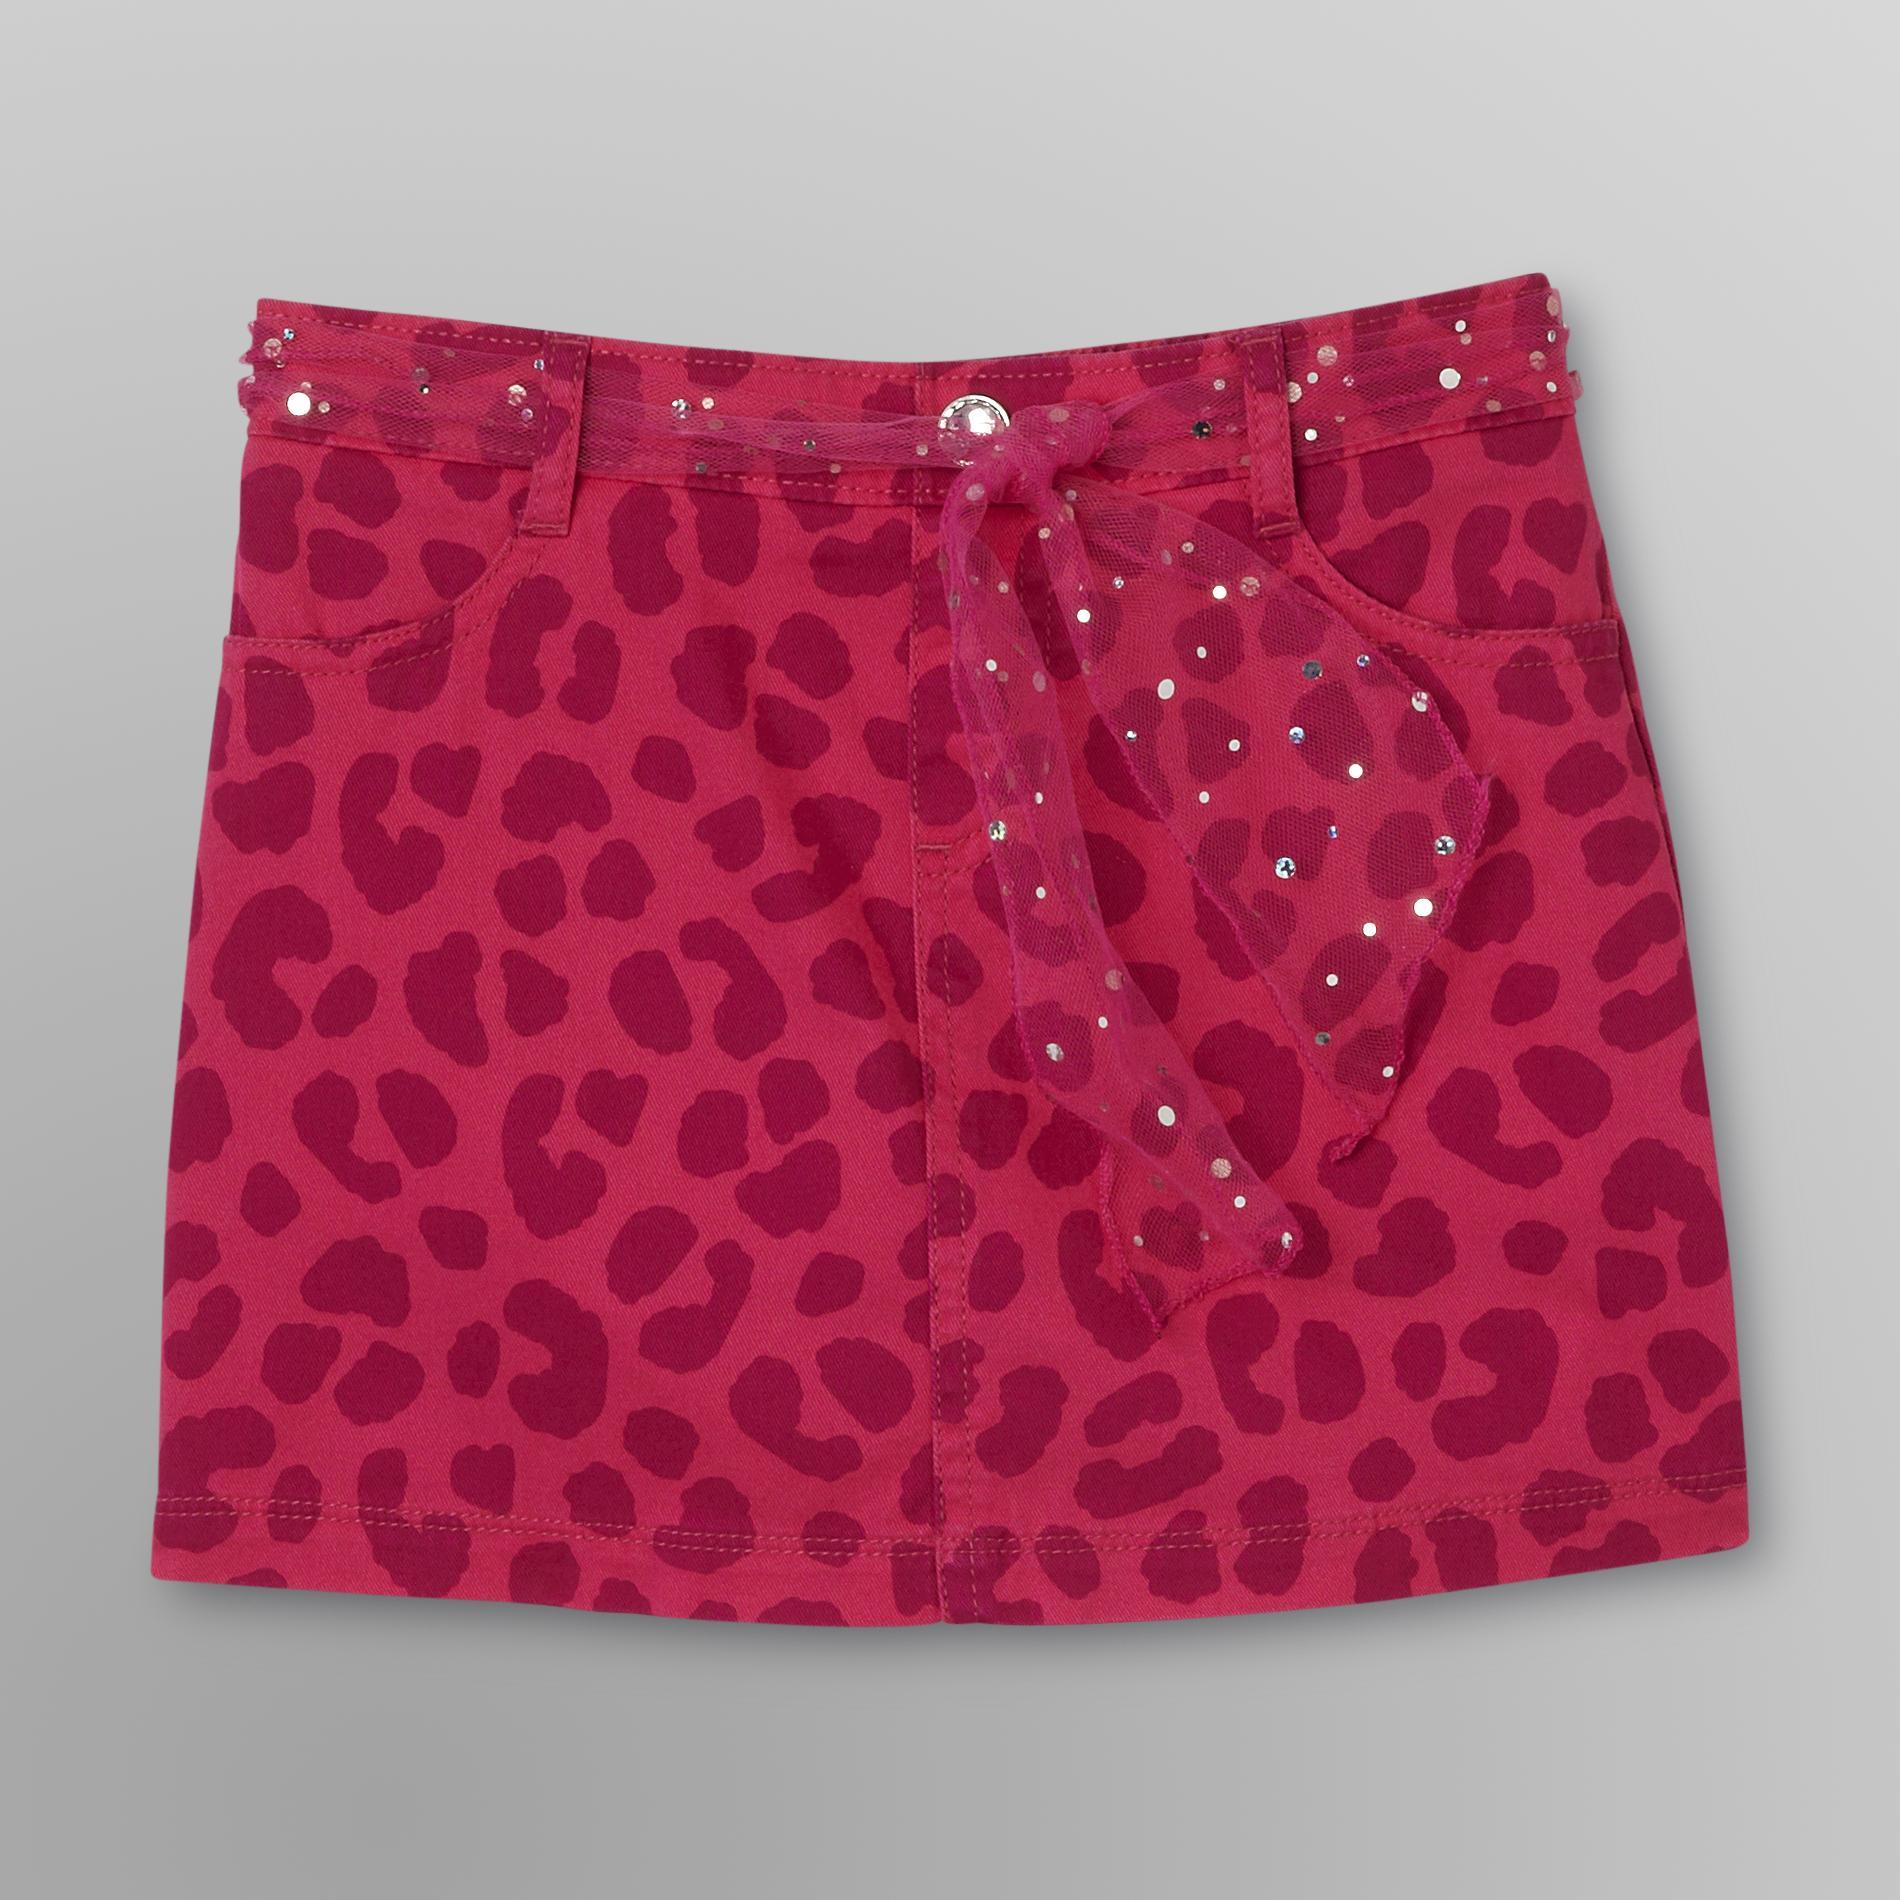 Basic Editions Girl's Twill Scooter & Belt - Leopard Print